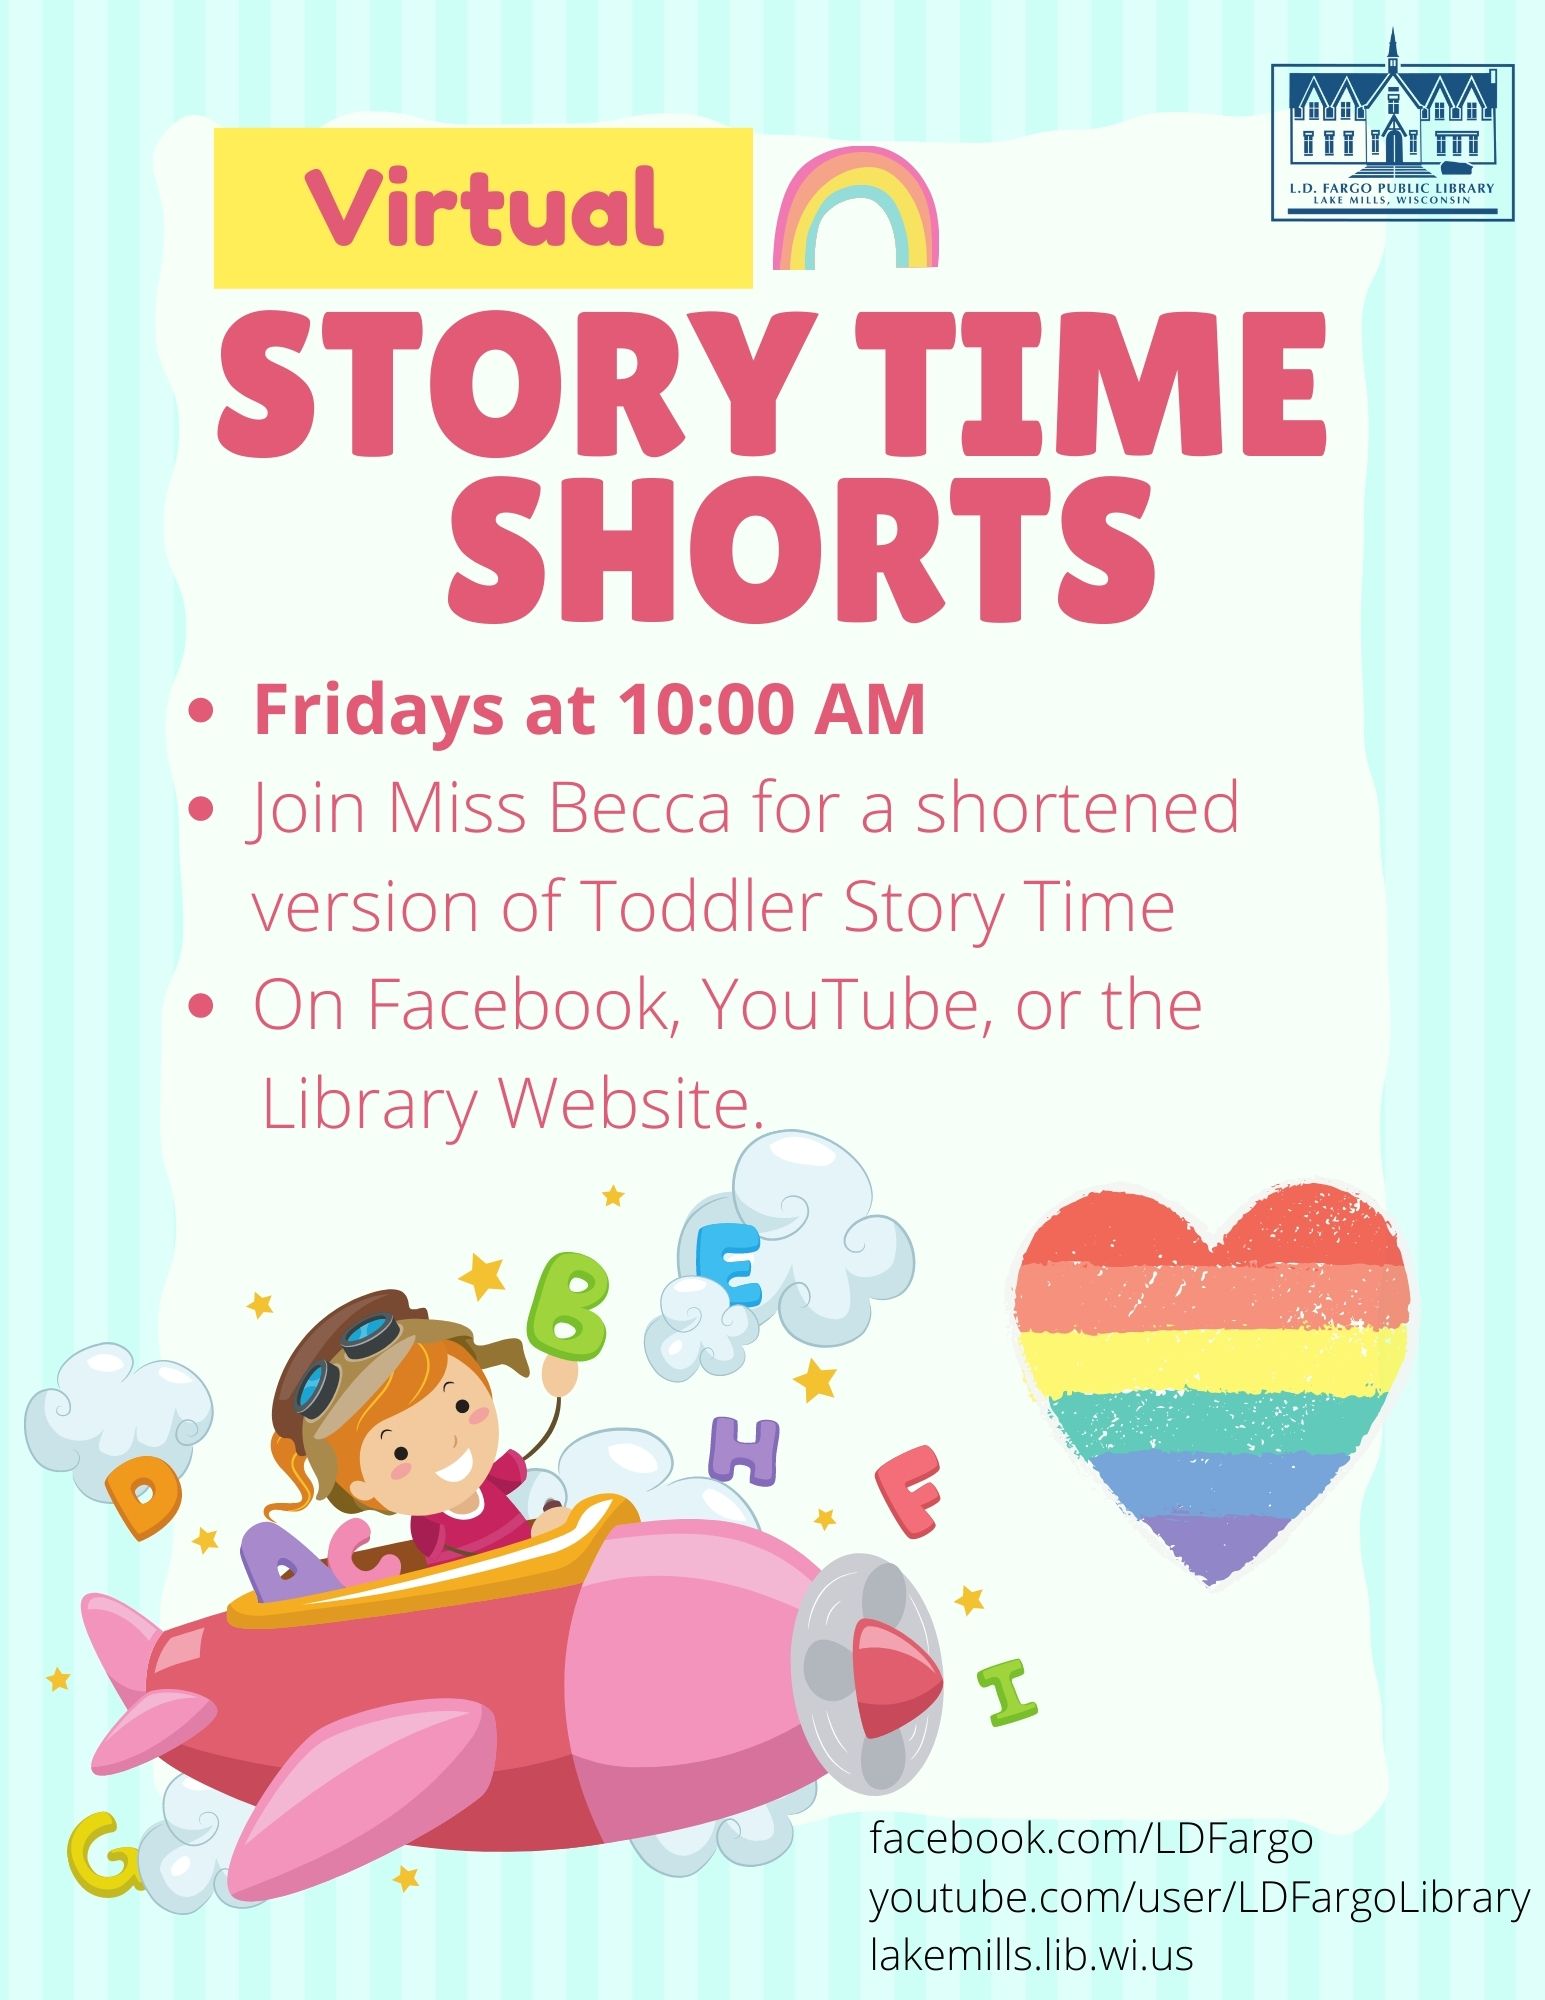 Story Time Shorts: Fridays at 10:00 AM Join Miss Becca for a shortened version of Toddler Story Time On Facebook, YouTube, or the Library Website. 